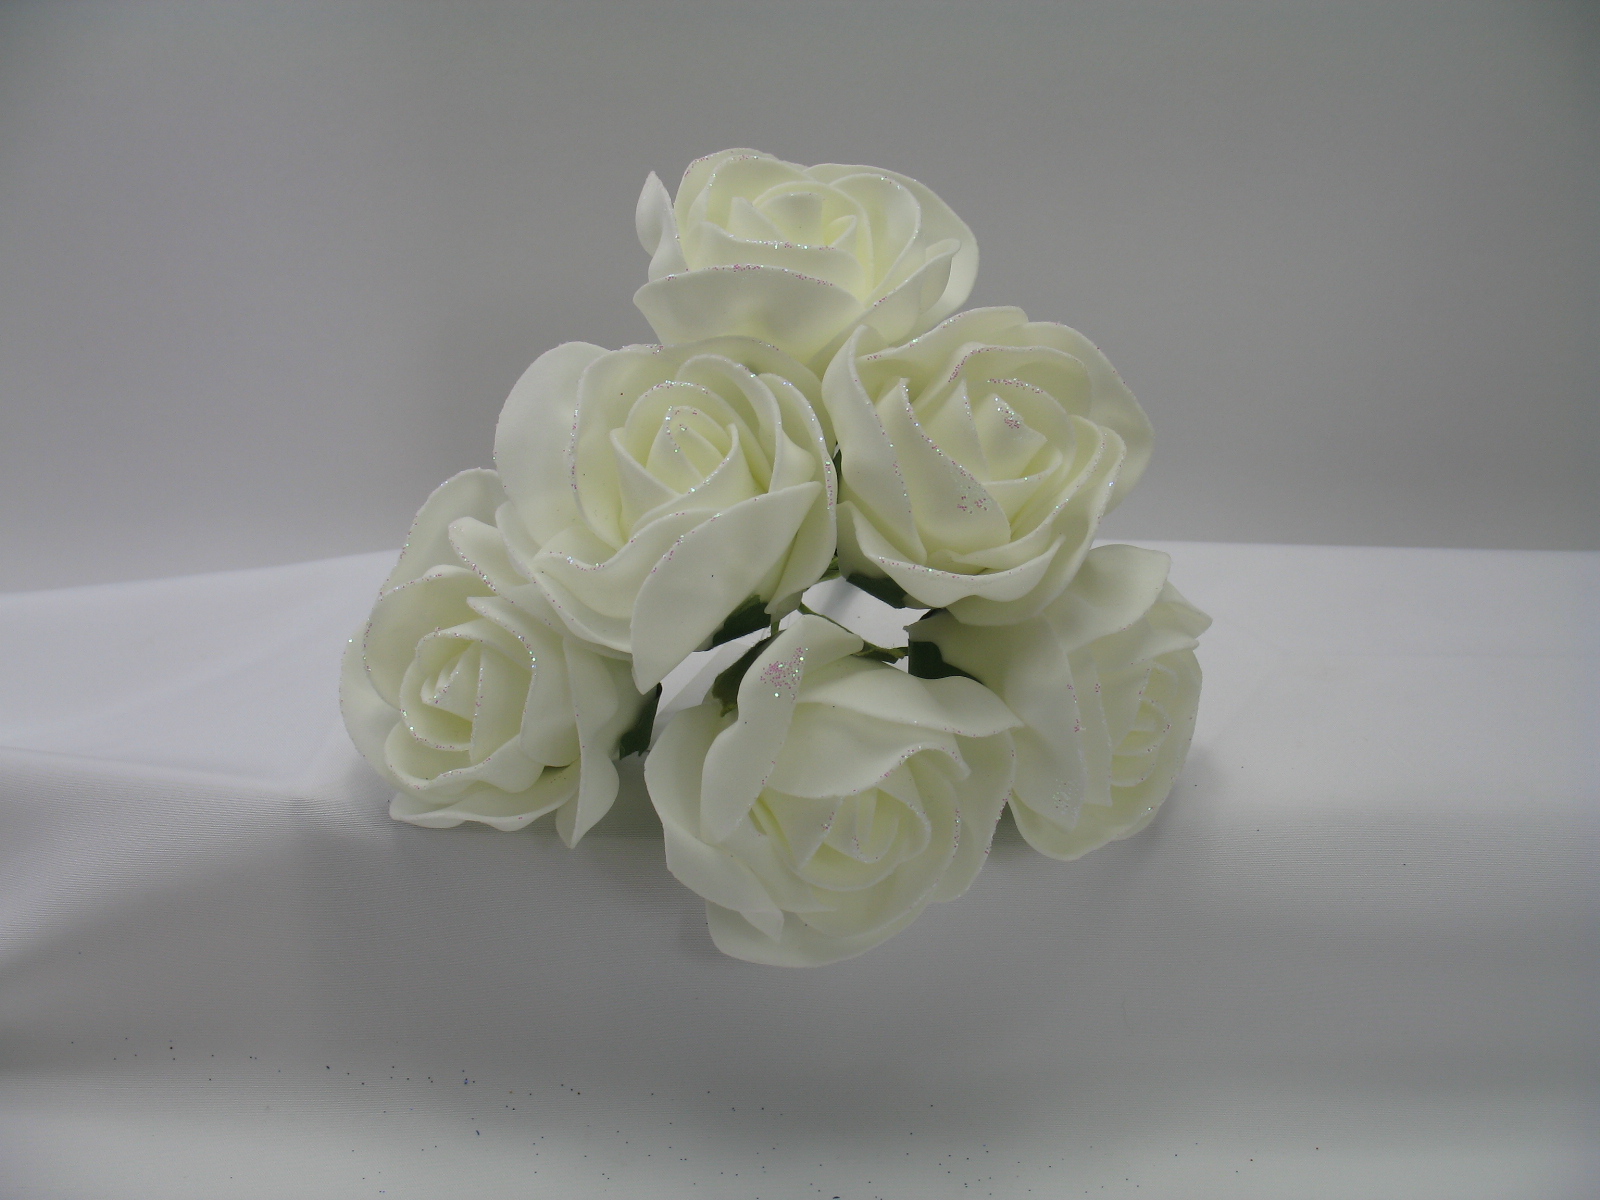 24 x 6cm Colourfast Artificial Foam Rose Wedding/Craft Flowers 4 bunches of 6 